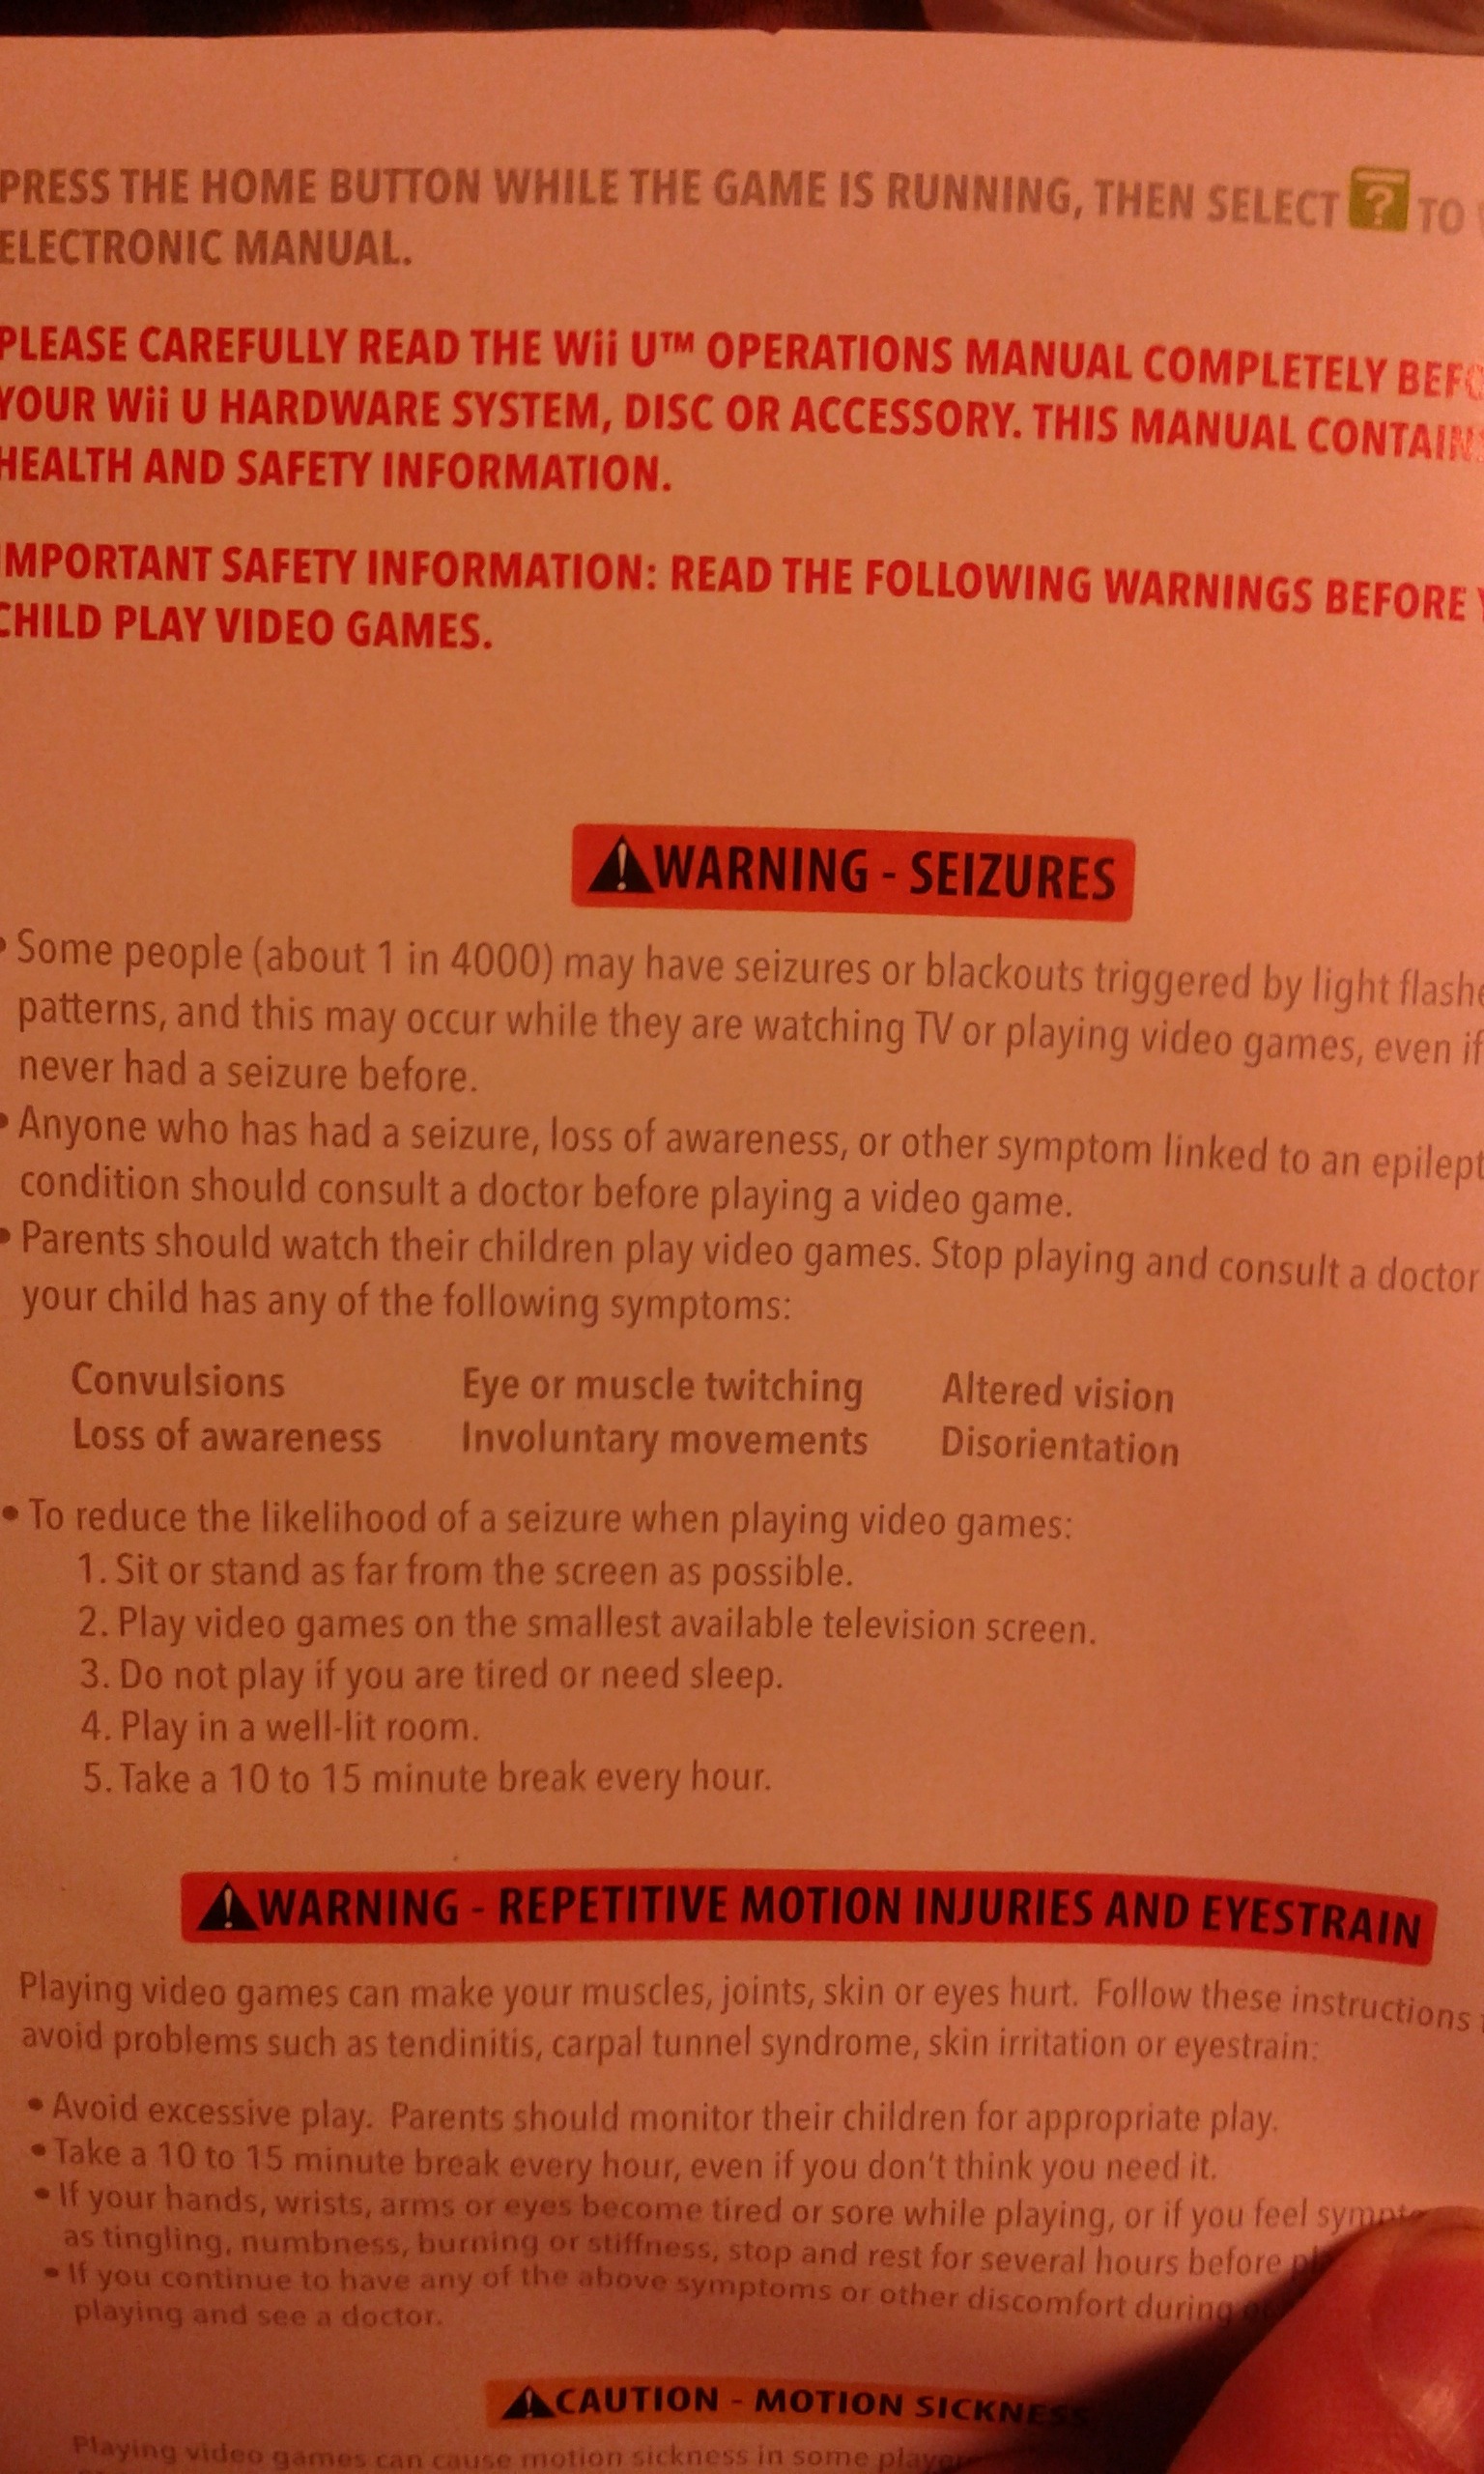 Photo of seizure warning in the Super Smash Bros WII U instruction manual. Similar warnings have been issued by Nintendo and other video game companies for decades due to flashing lights in games. 